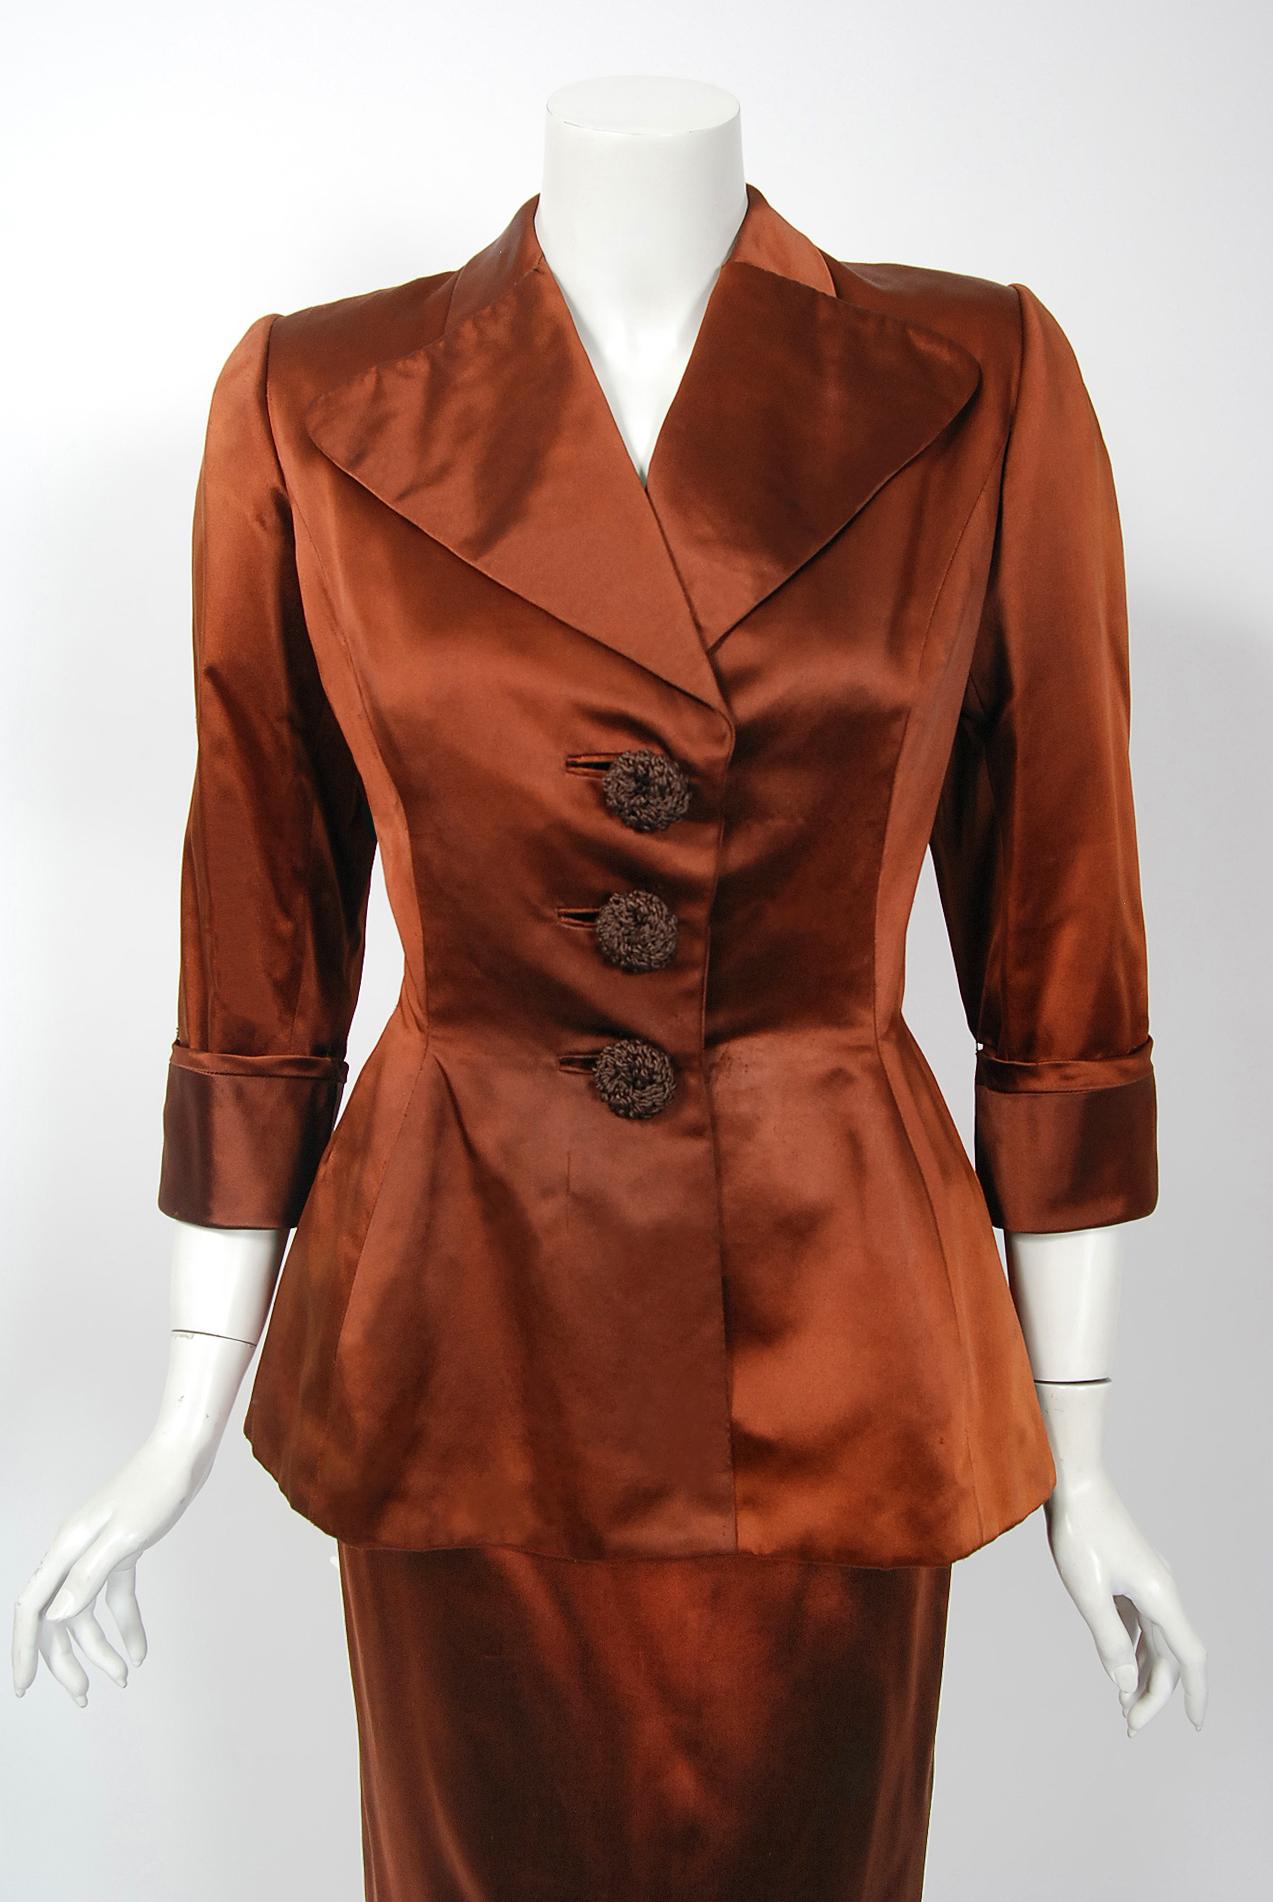 A breathtaking and extremely rare Balenciaga Haute-Couture copper silk satin sculpted cocktail suit from his 1946 fall-winter collection. Cristobal Balenciaga began his life's work in fashion at a very young age. It is fabled that the Marquesa de